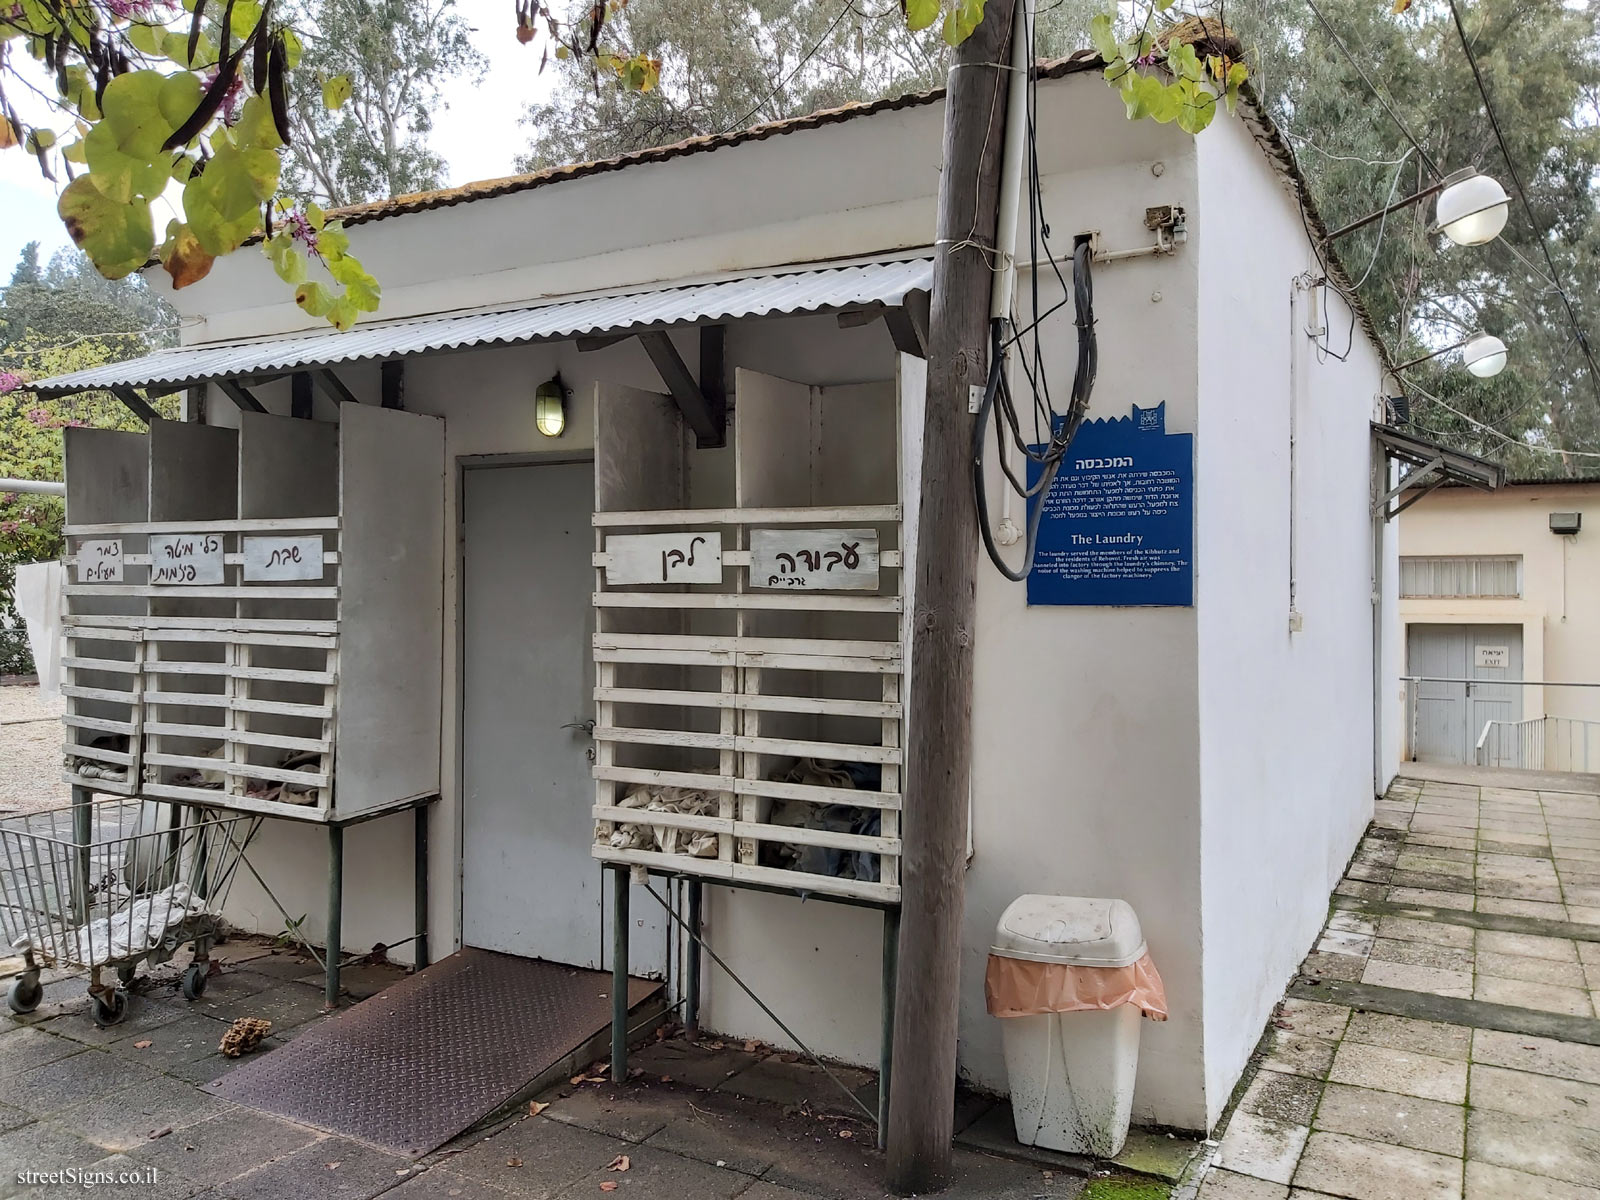 Rehovot - Heritage Sites in Israel - Ayalon Institute - The Laundry - David Fikes St 1, Rehovot, Israel